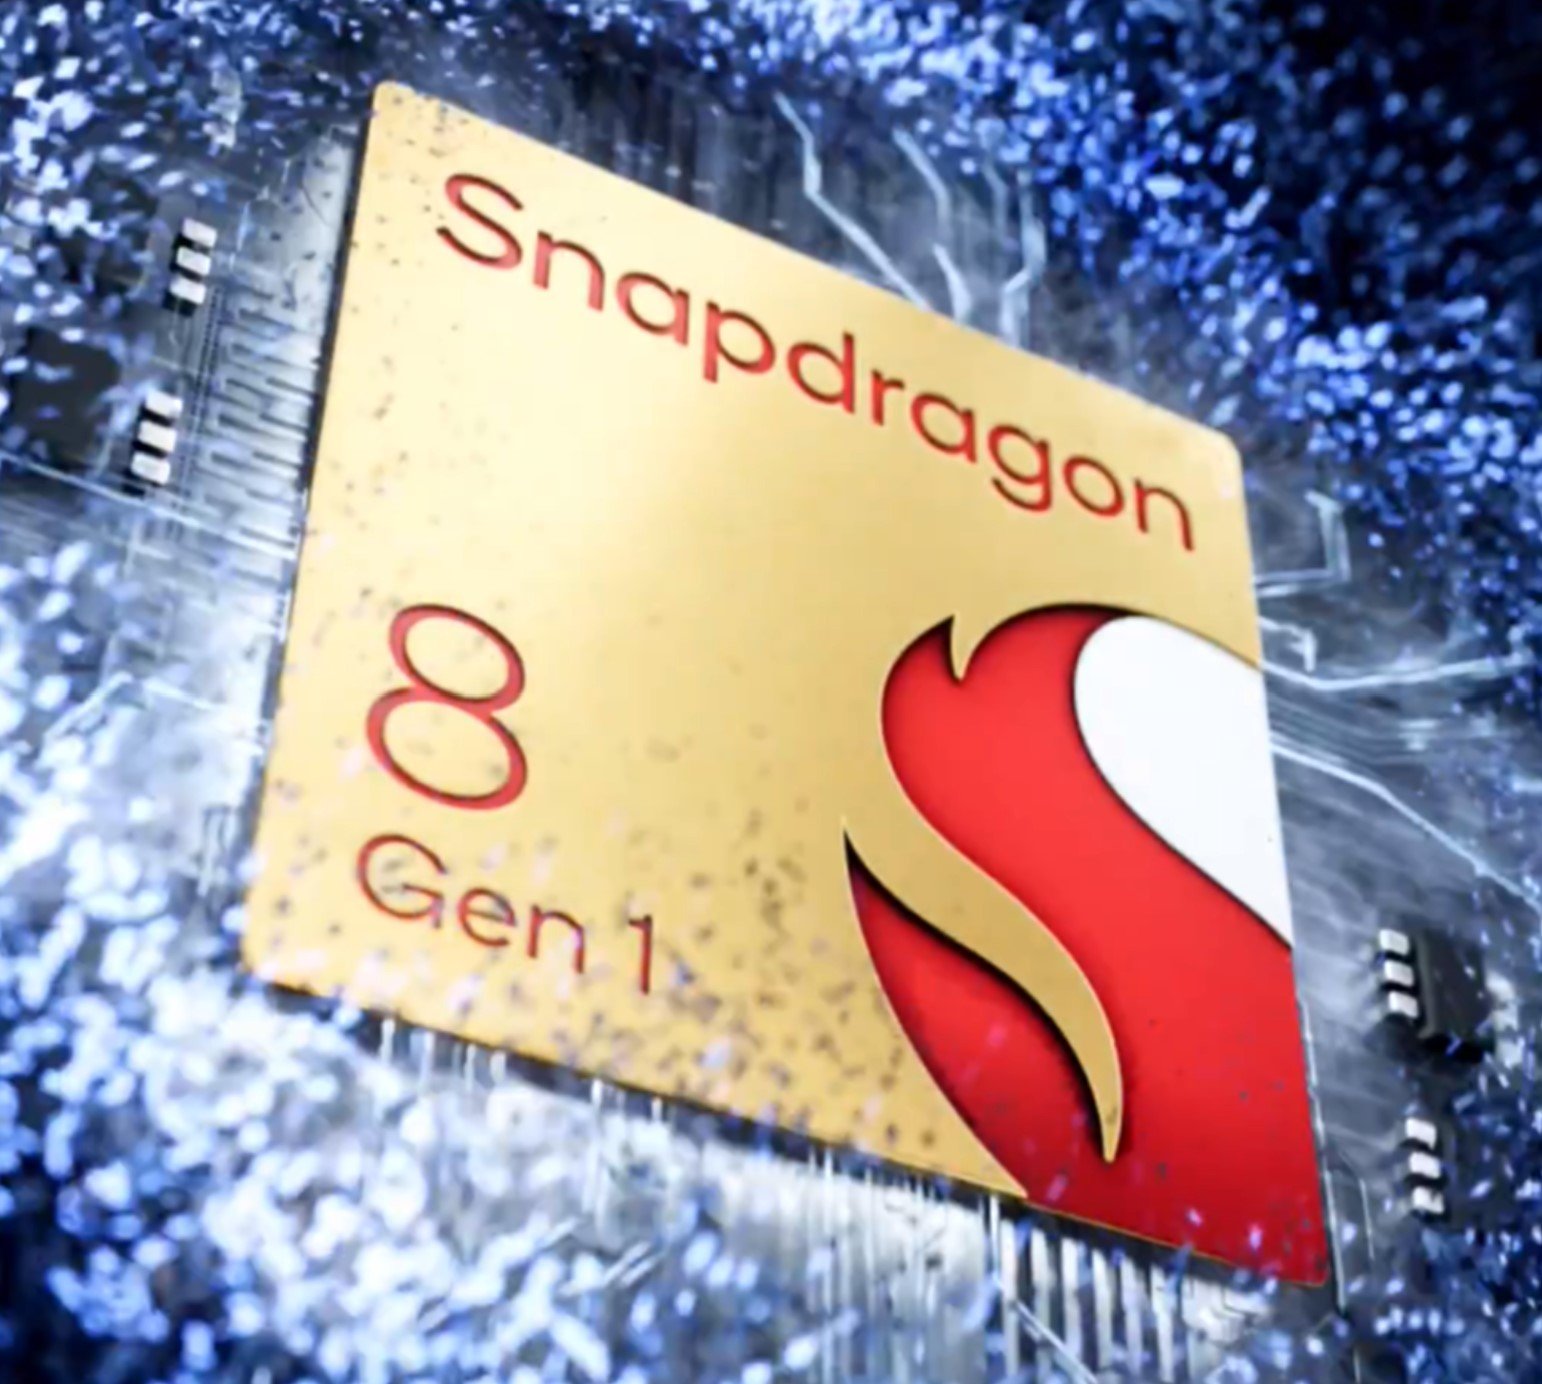 Qualcomm Snapdragon 8+ Gen 1 is more powerful and efficient